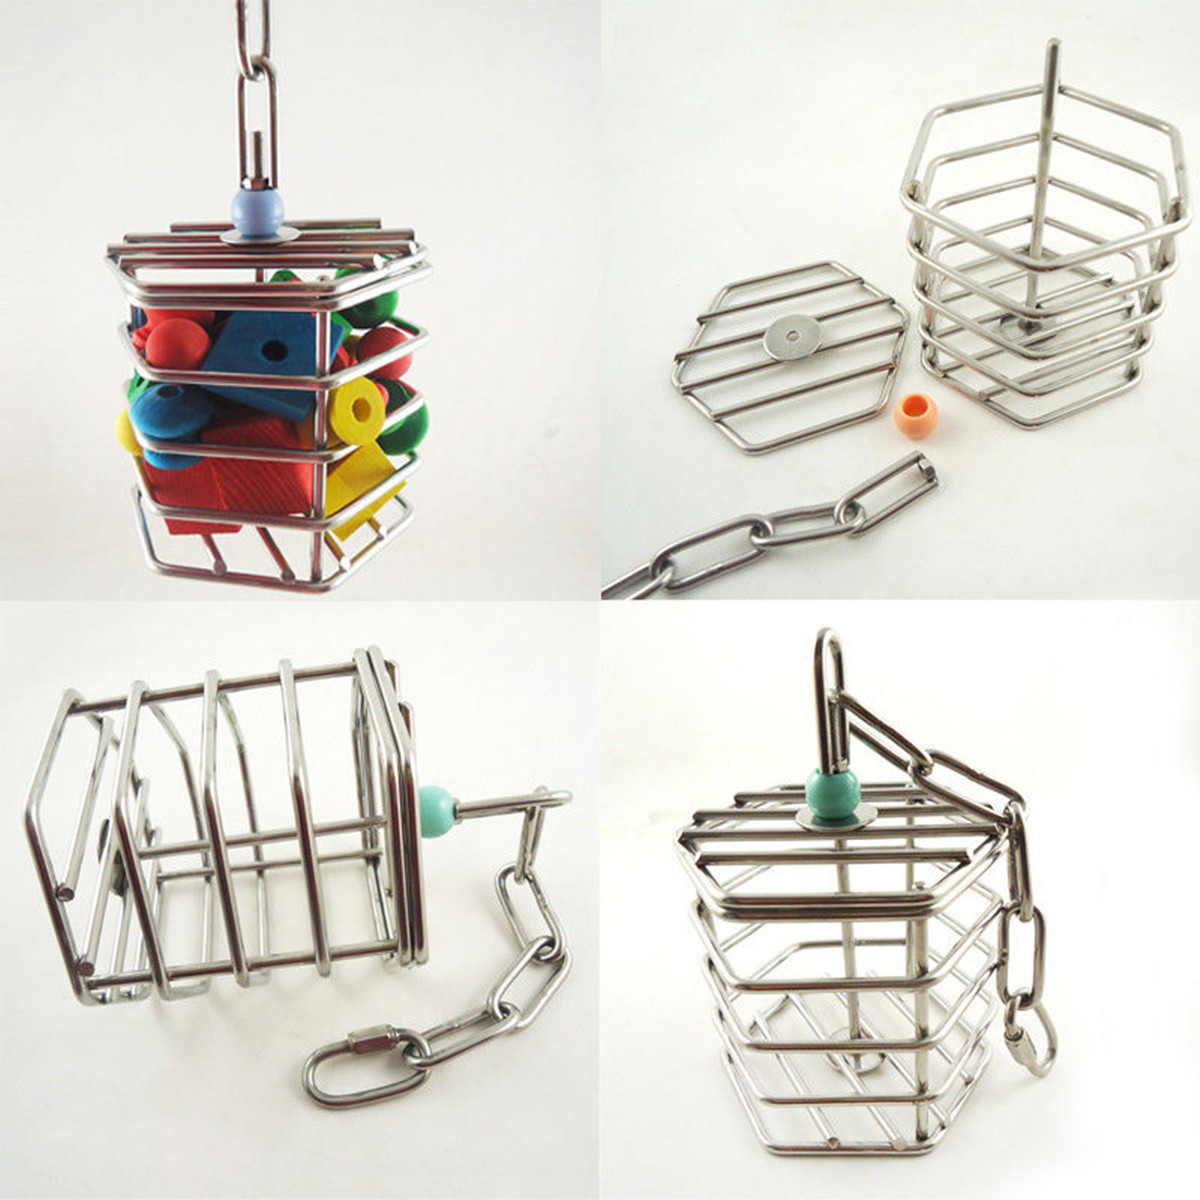 Stainless-Steel-Pet-Bird-Parrot-Foraging-Cage-Pigeon-Macaw-Feeder-Hanging-Entertainment-Toys-1355322